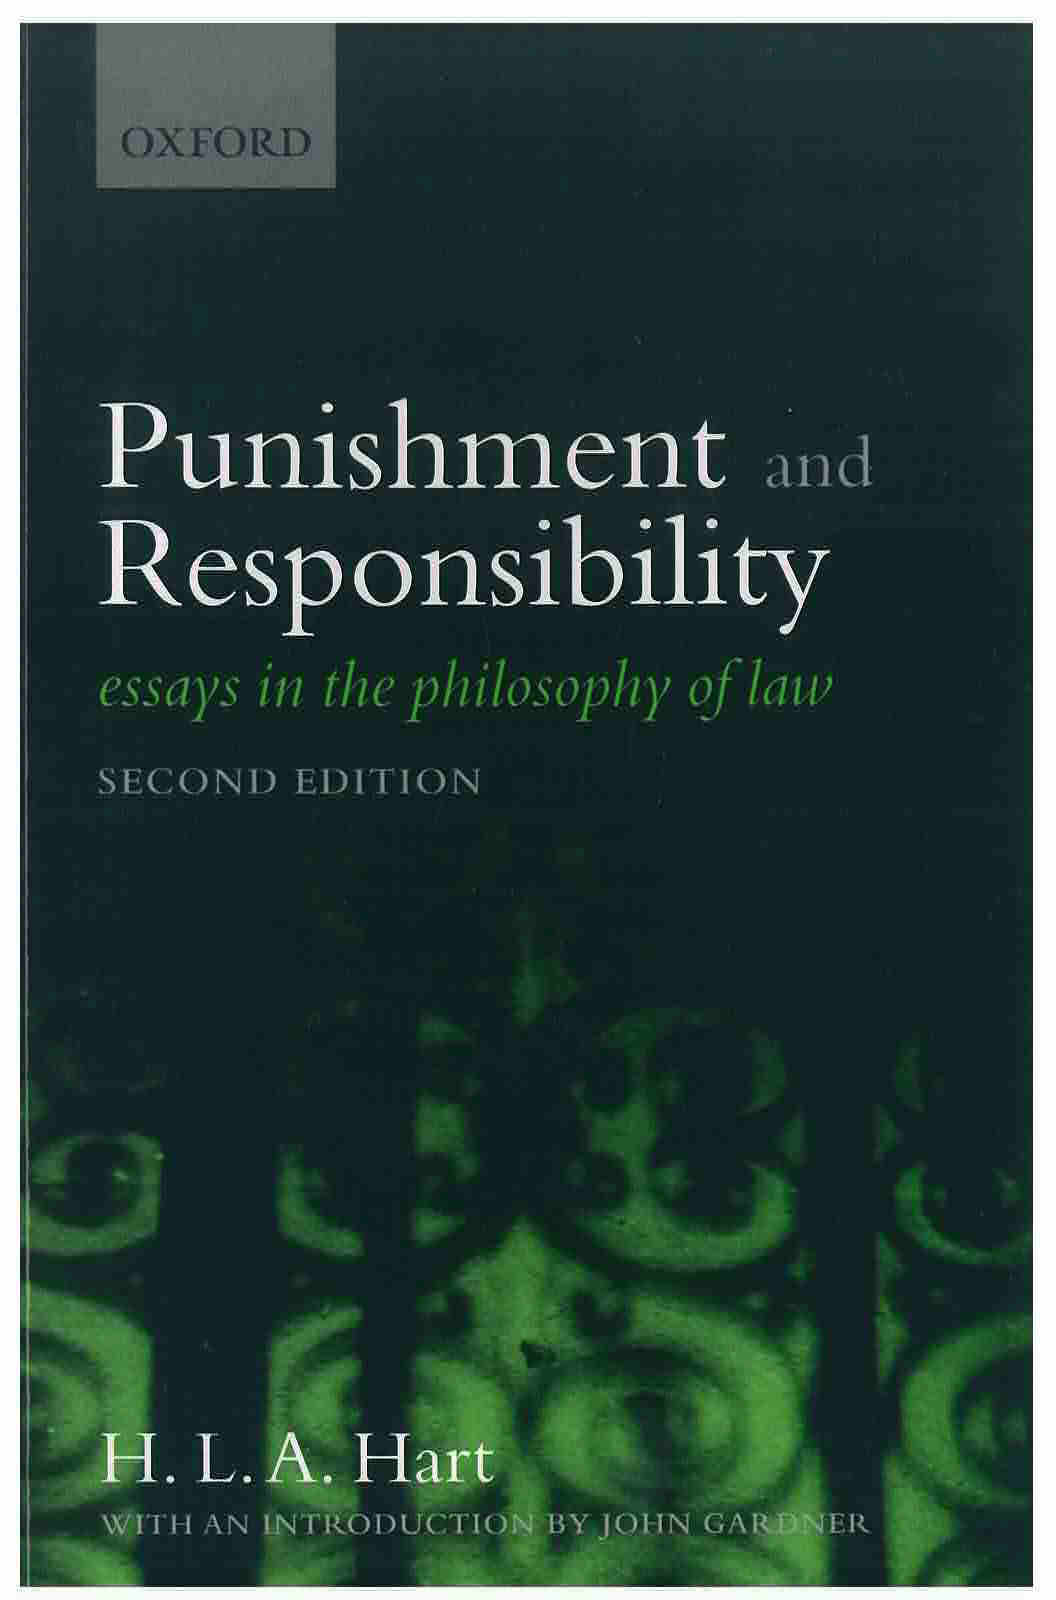 Punishment and responsibility. Essay in the philosophy of law